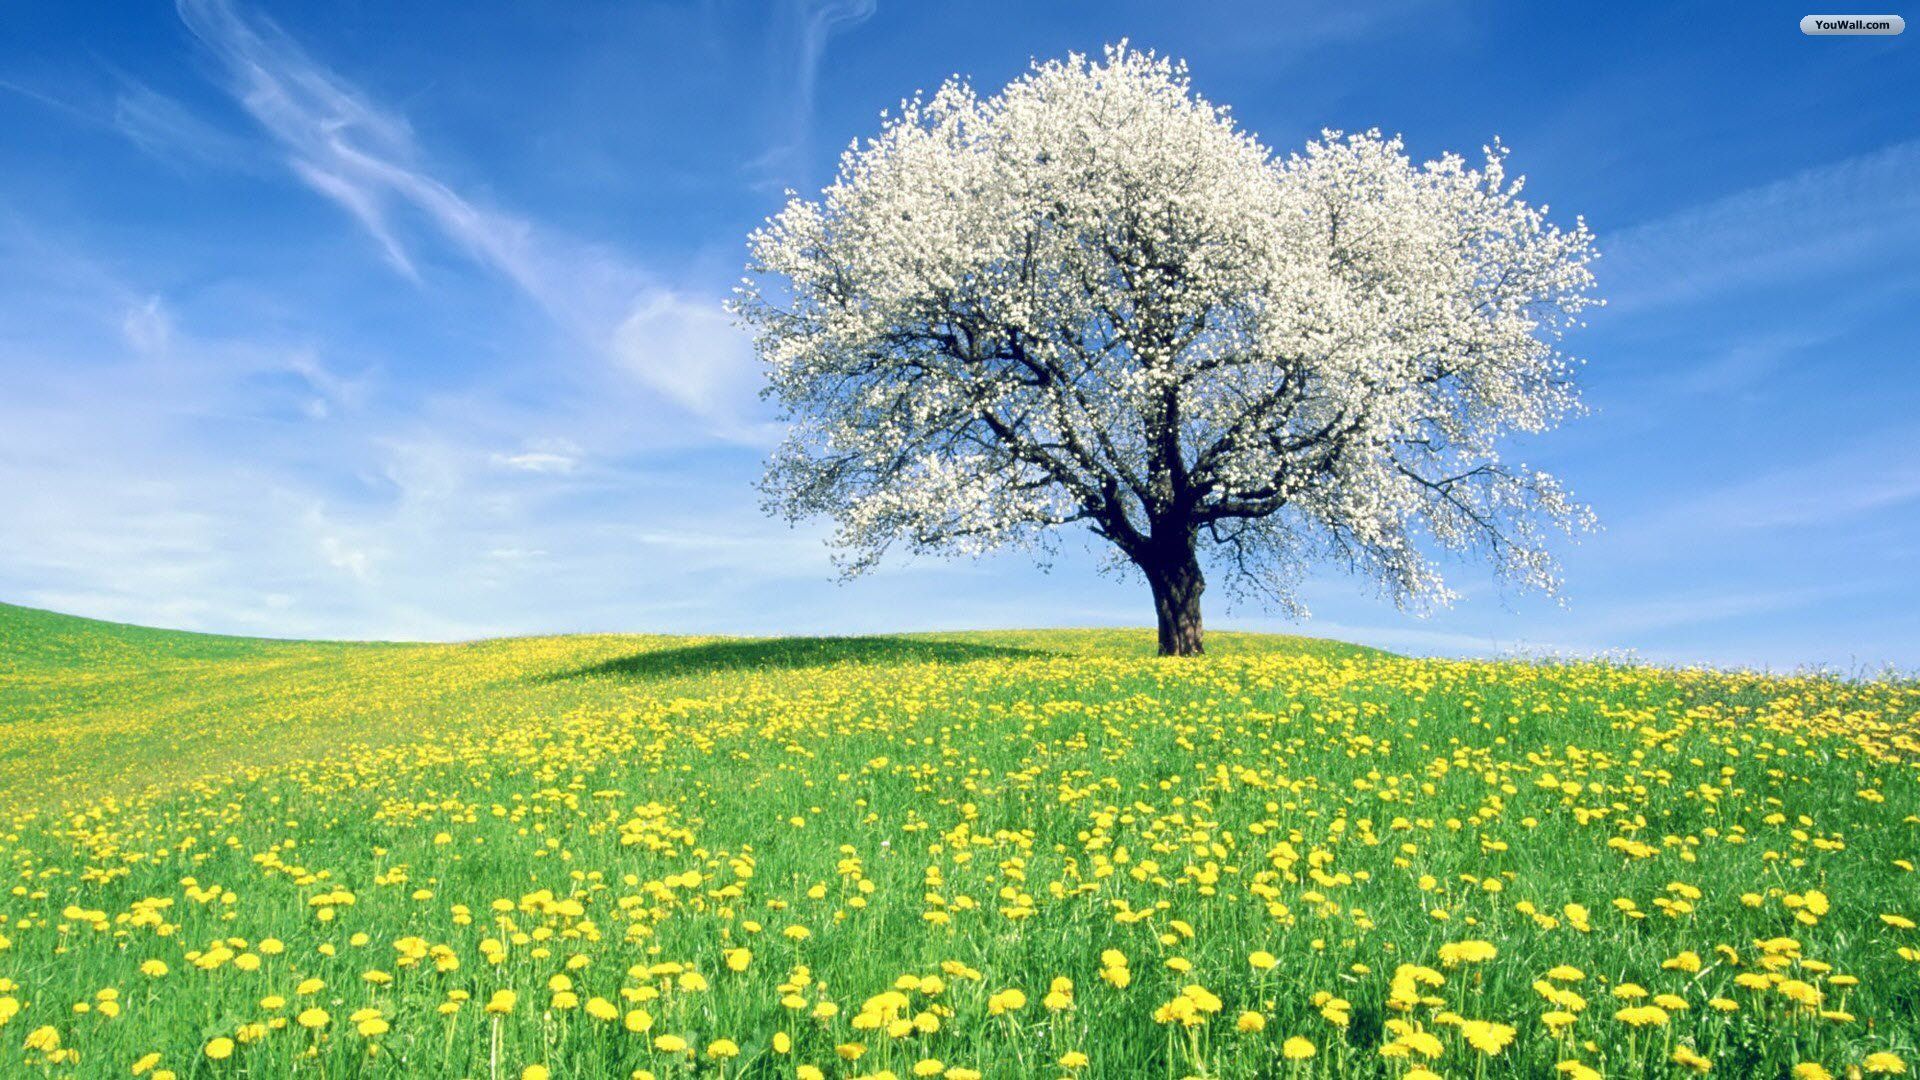 A tree with white flowers is in the middle of a field of yellow flowers.